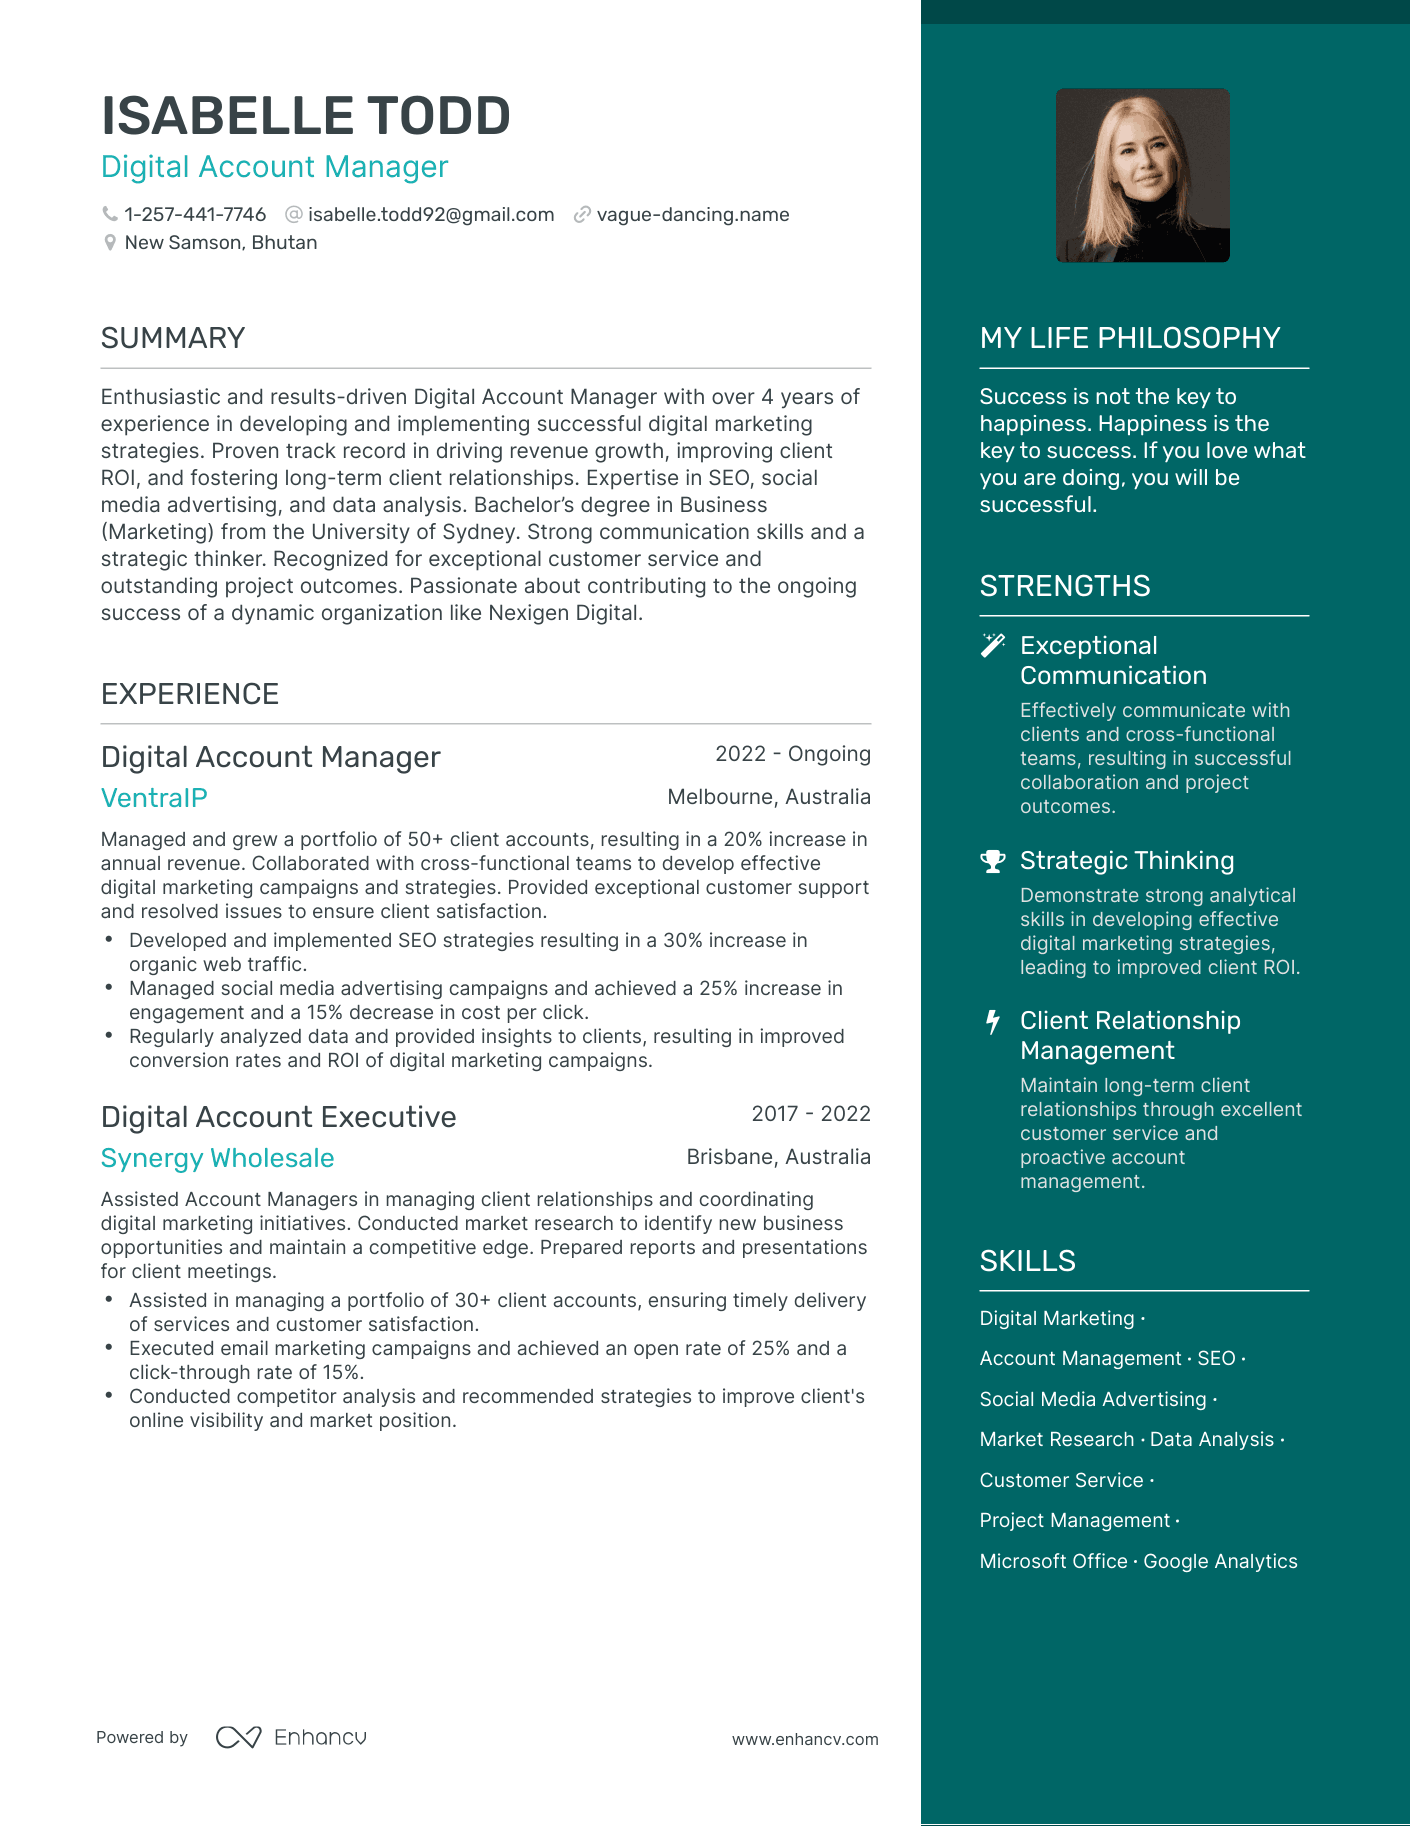 Digital Account Manager resume example